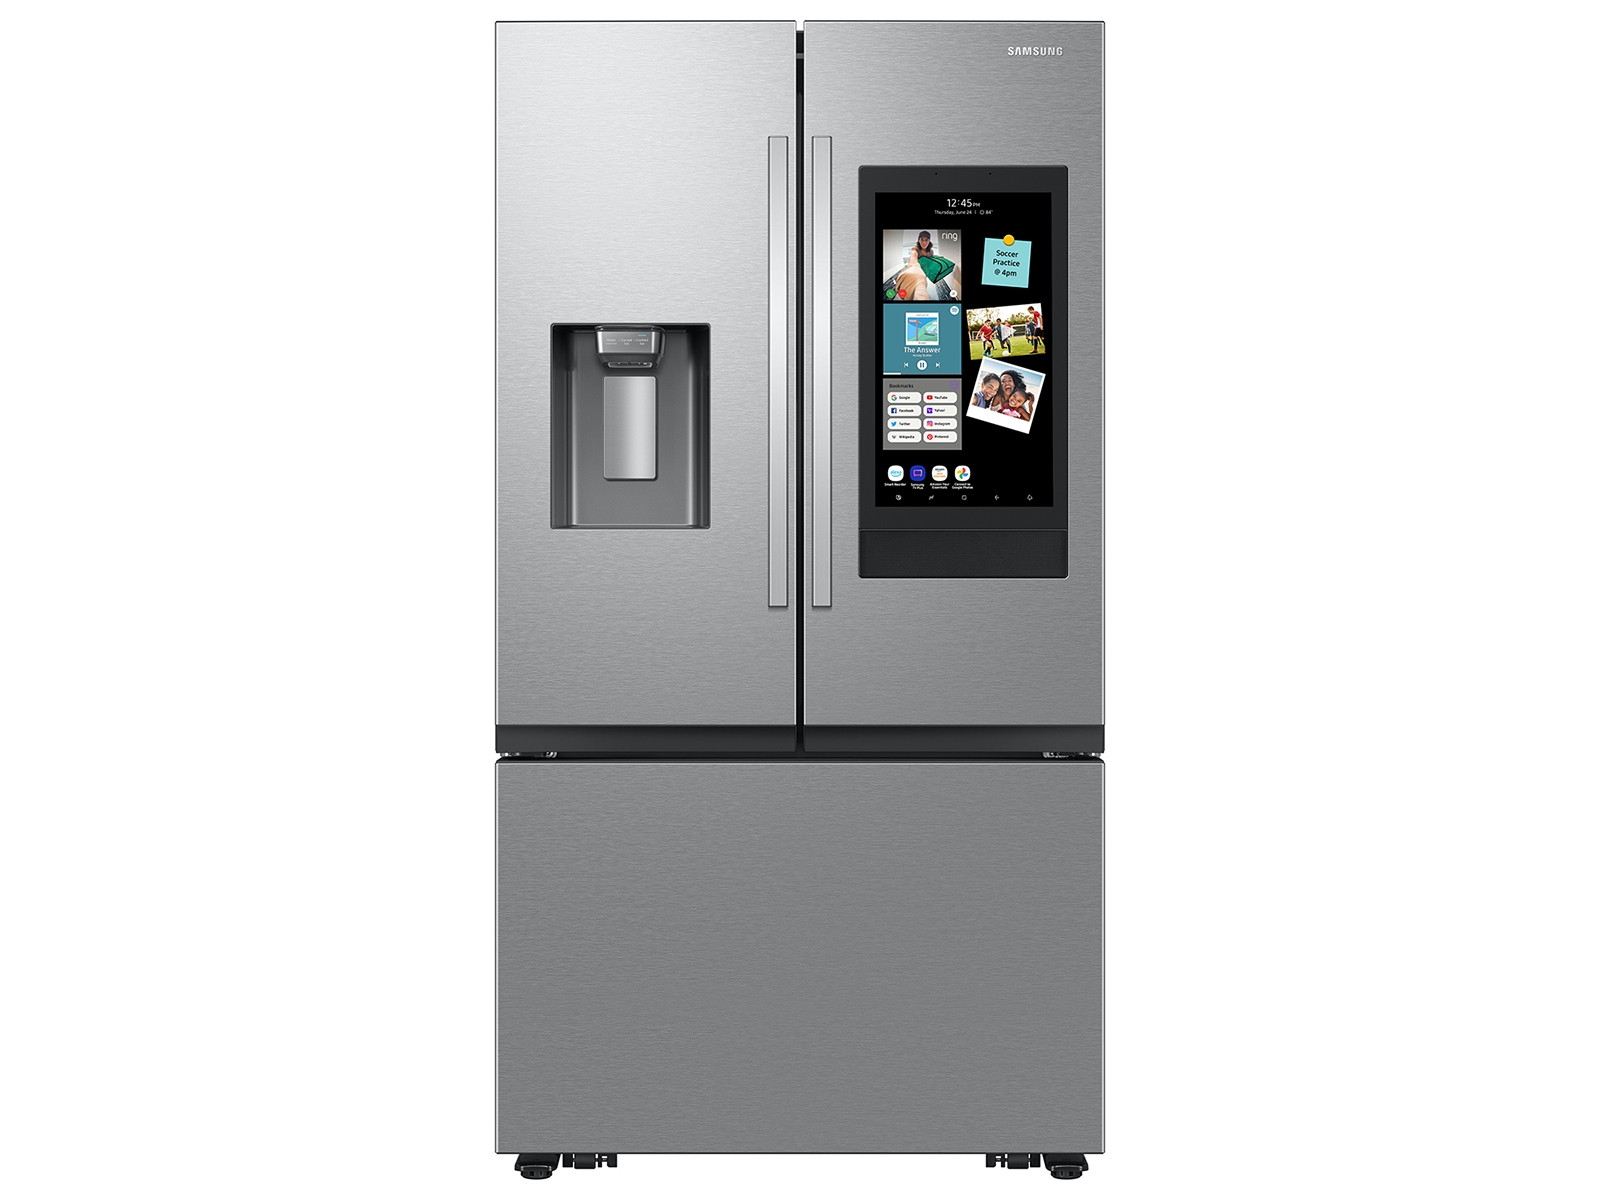 MasterCard lets you order groceries from this Samsung fridge